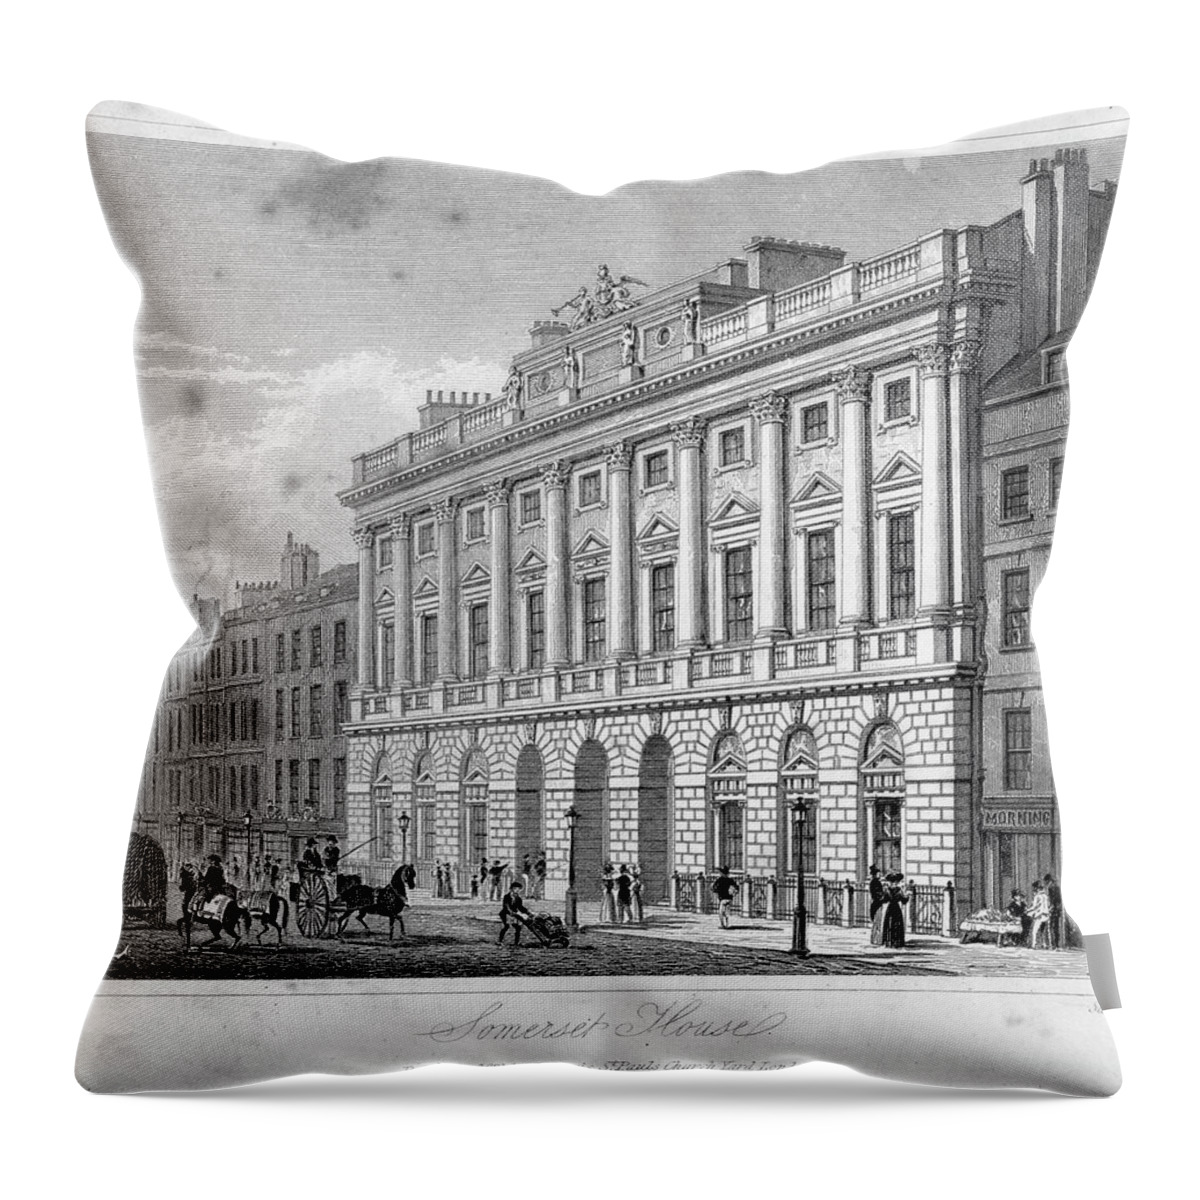 The Strand Throw Pillow featuring the digital art Somerset House by Duncan1890